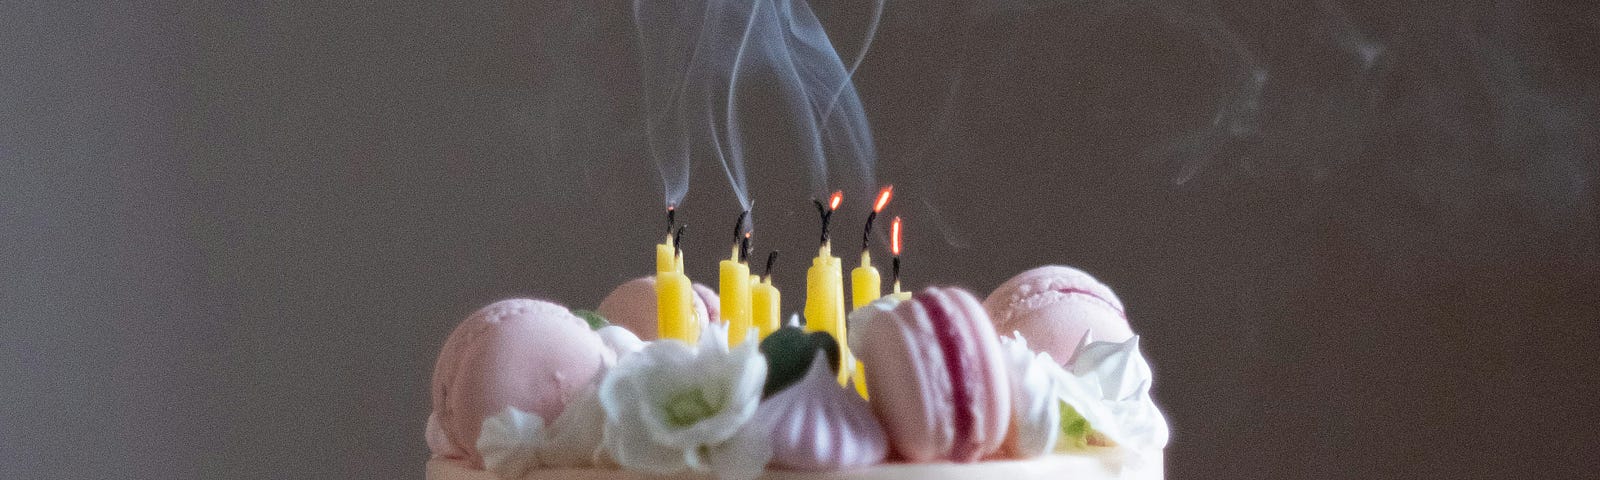 Smoke rising from recently extinguished candles on a birthday cake